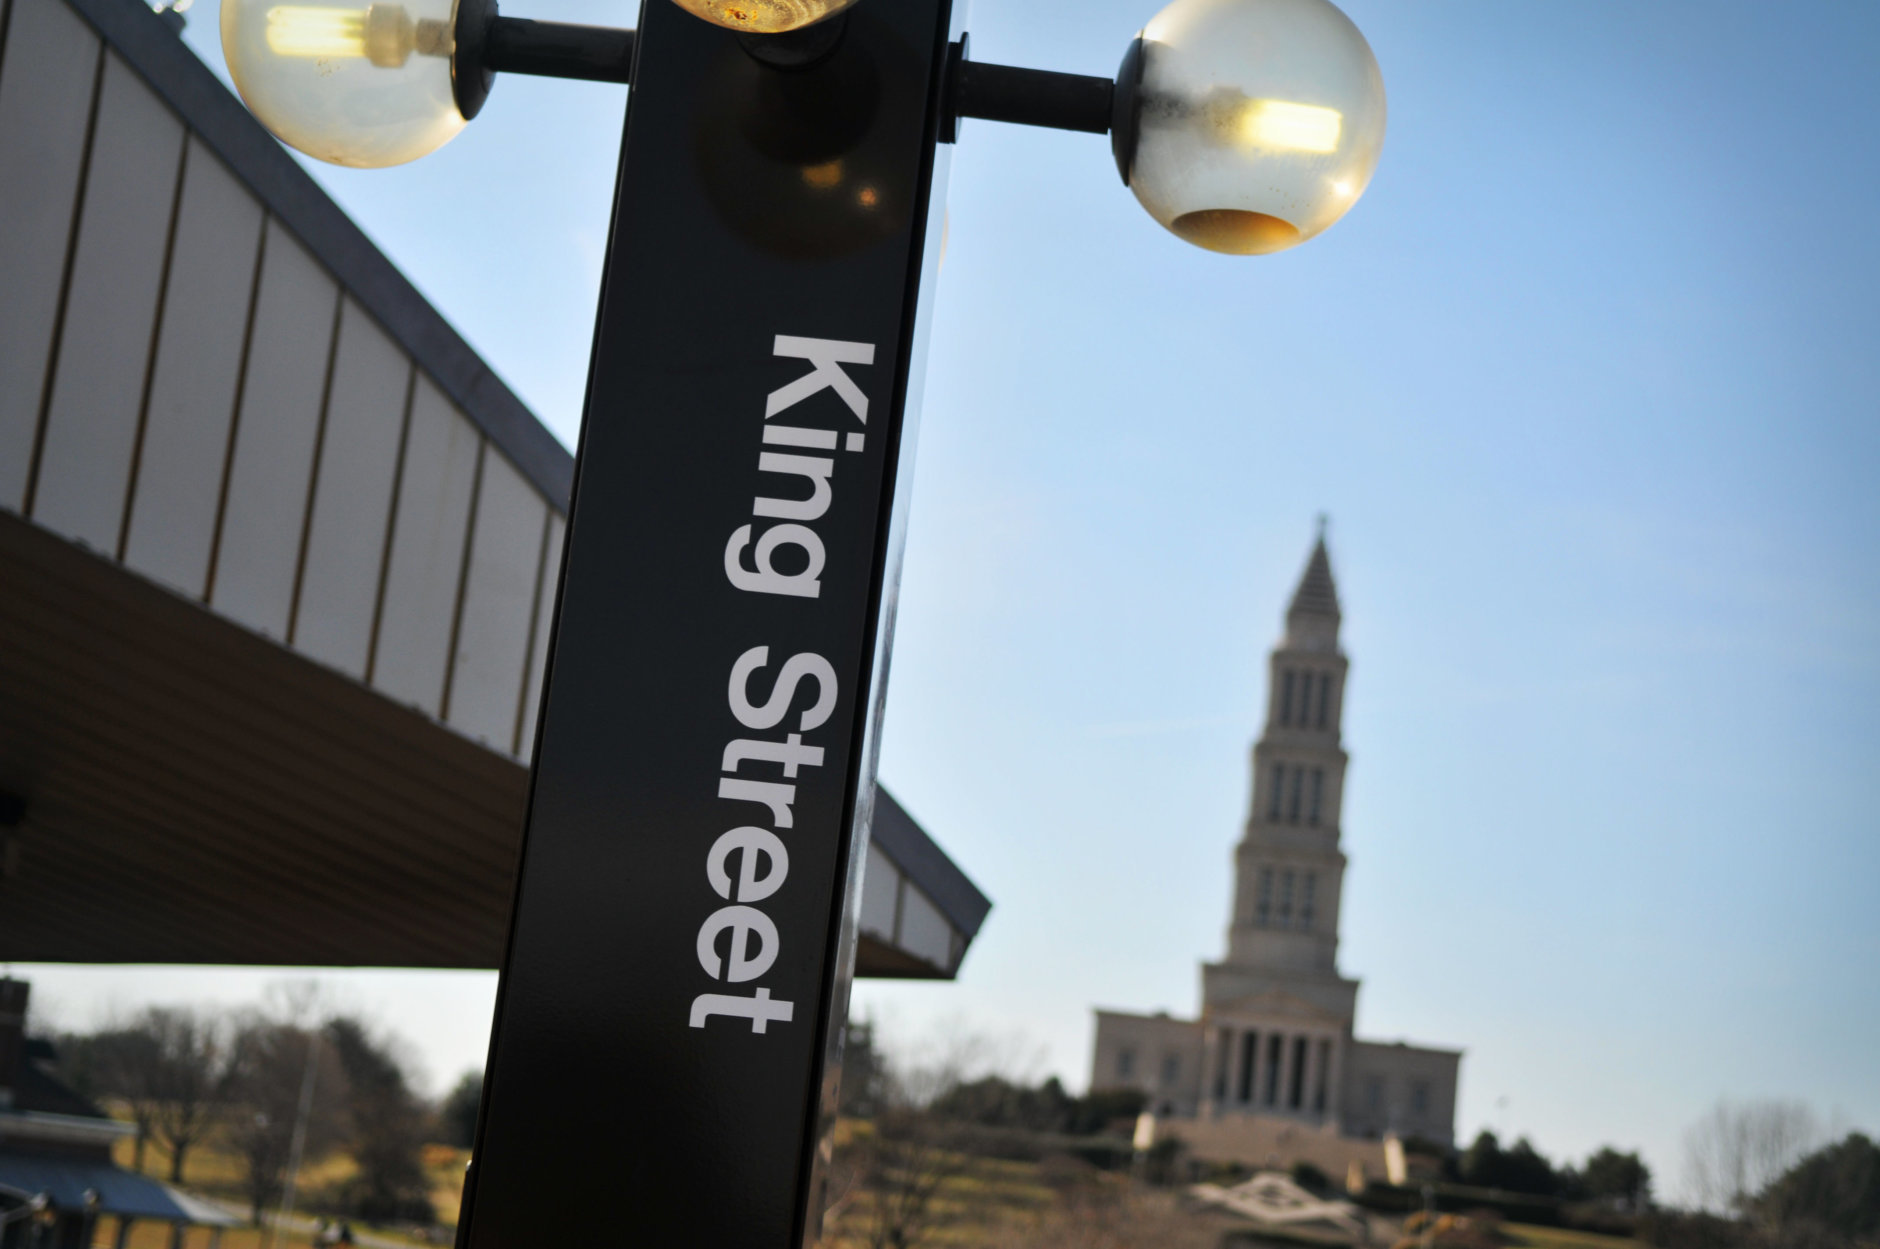 The King Street Metro station sign is seen here. (Getty Images/iStockphoto)